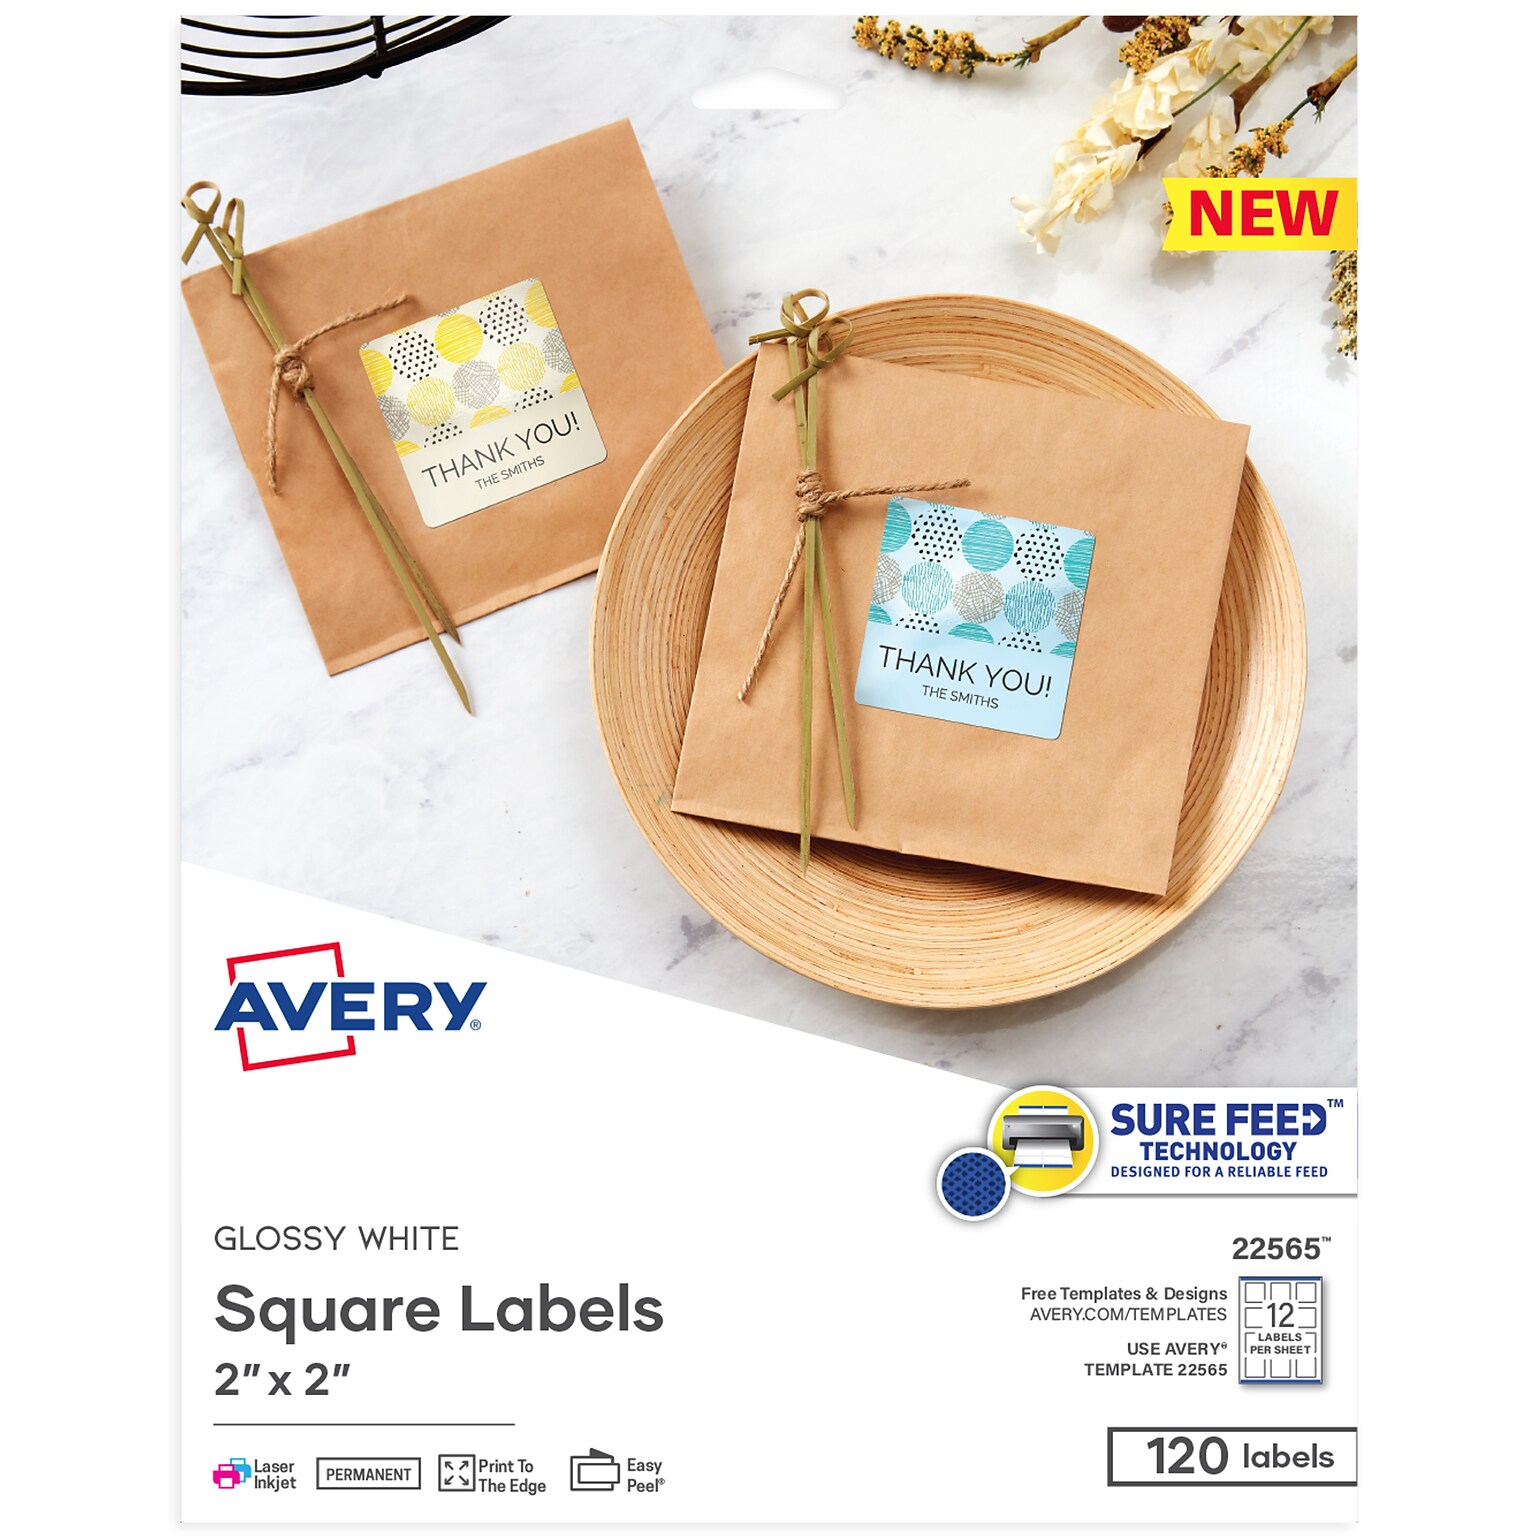 Avery Print-to-the-Edge Laser/Inkjet Labels, 2 x 2, Glossy White, 12 Labels/Sheet, 10 Sheets/Pack, 120 Labels/Pack (22565)